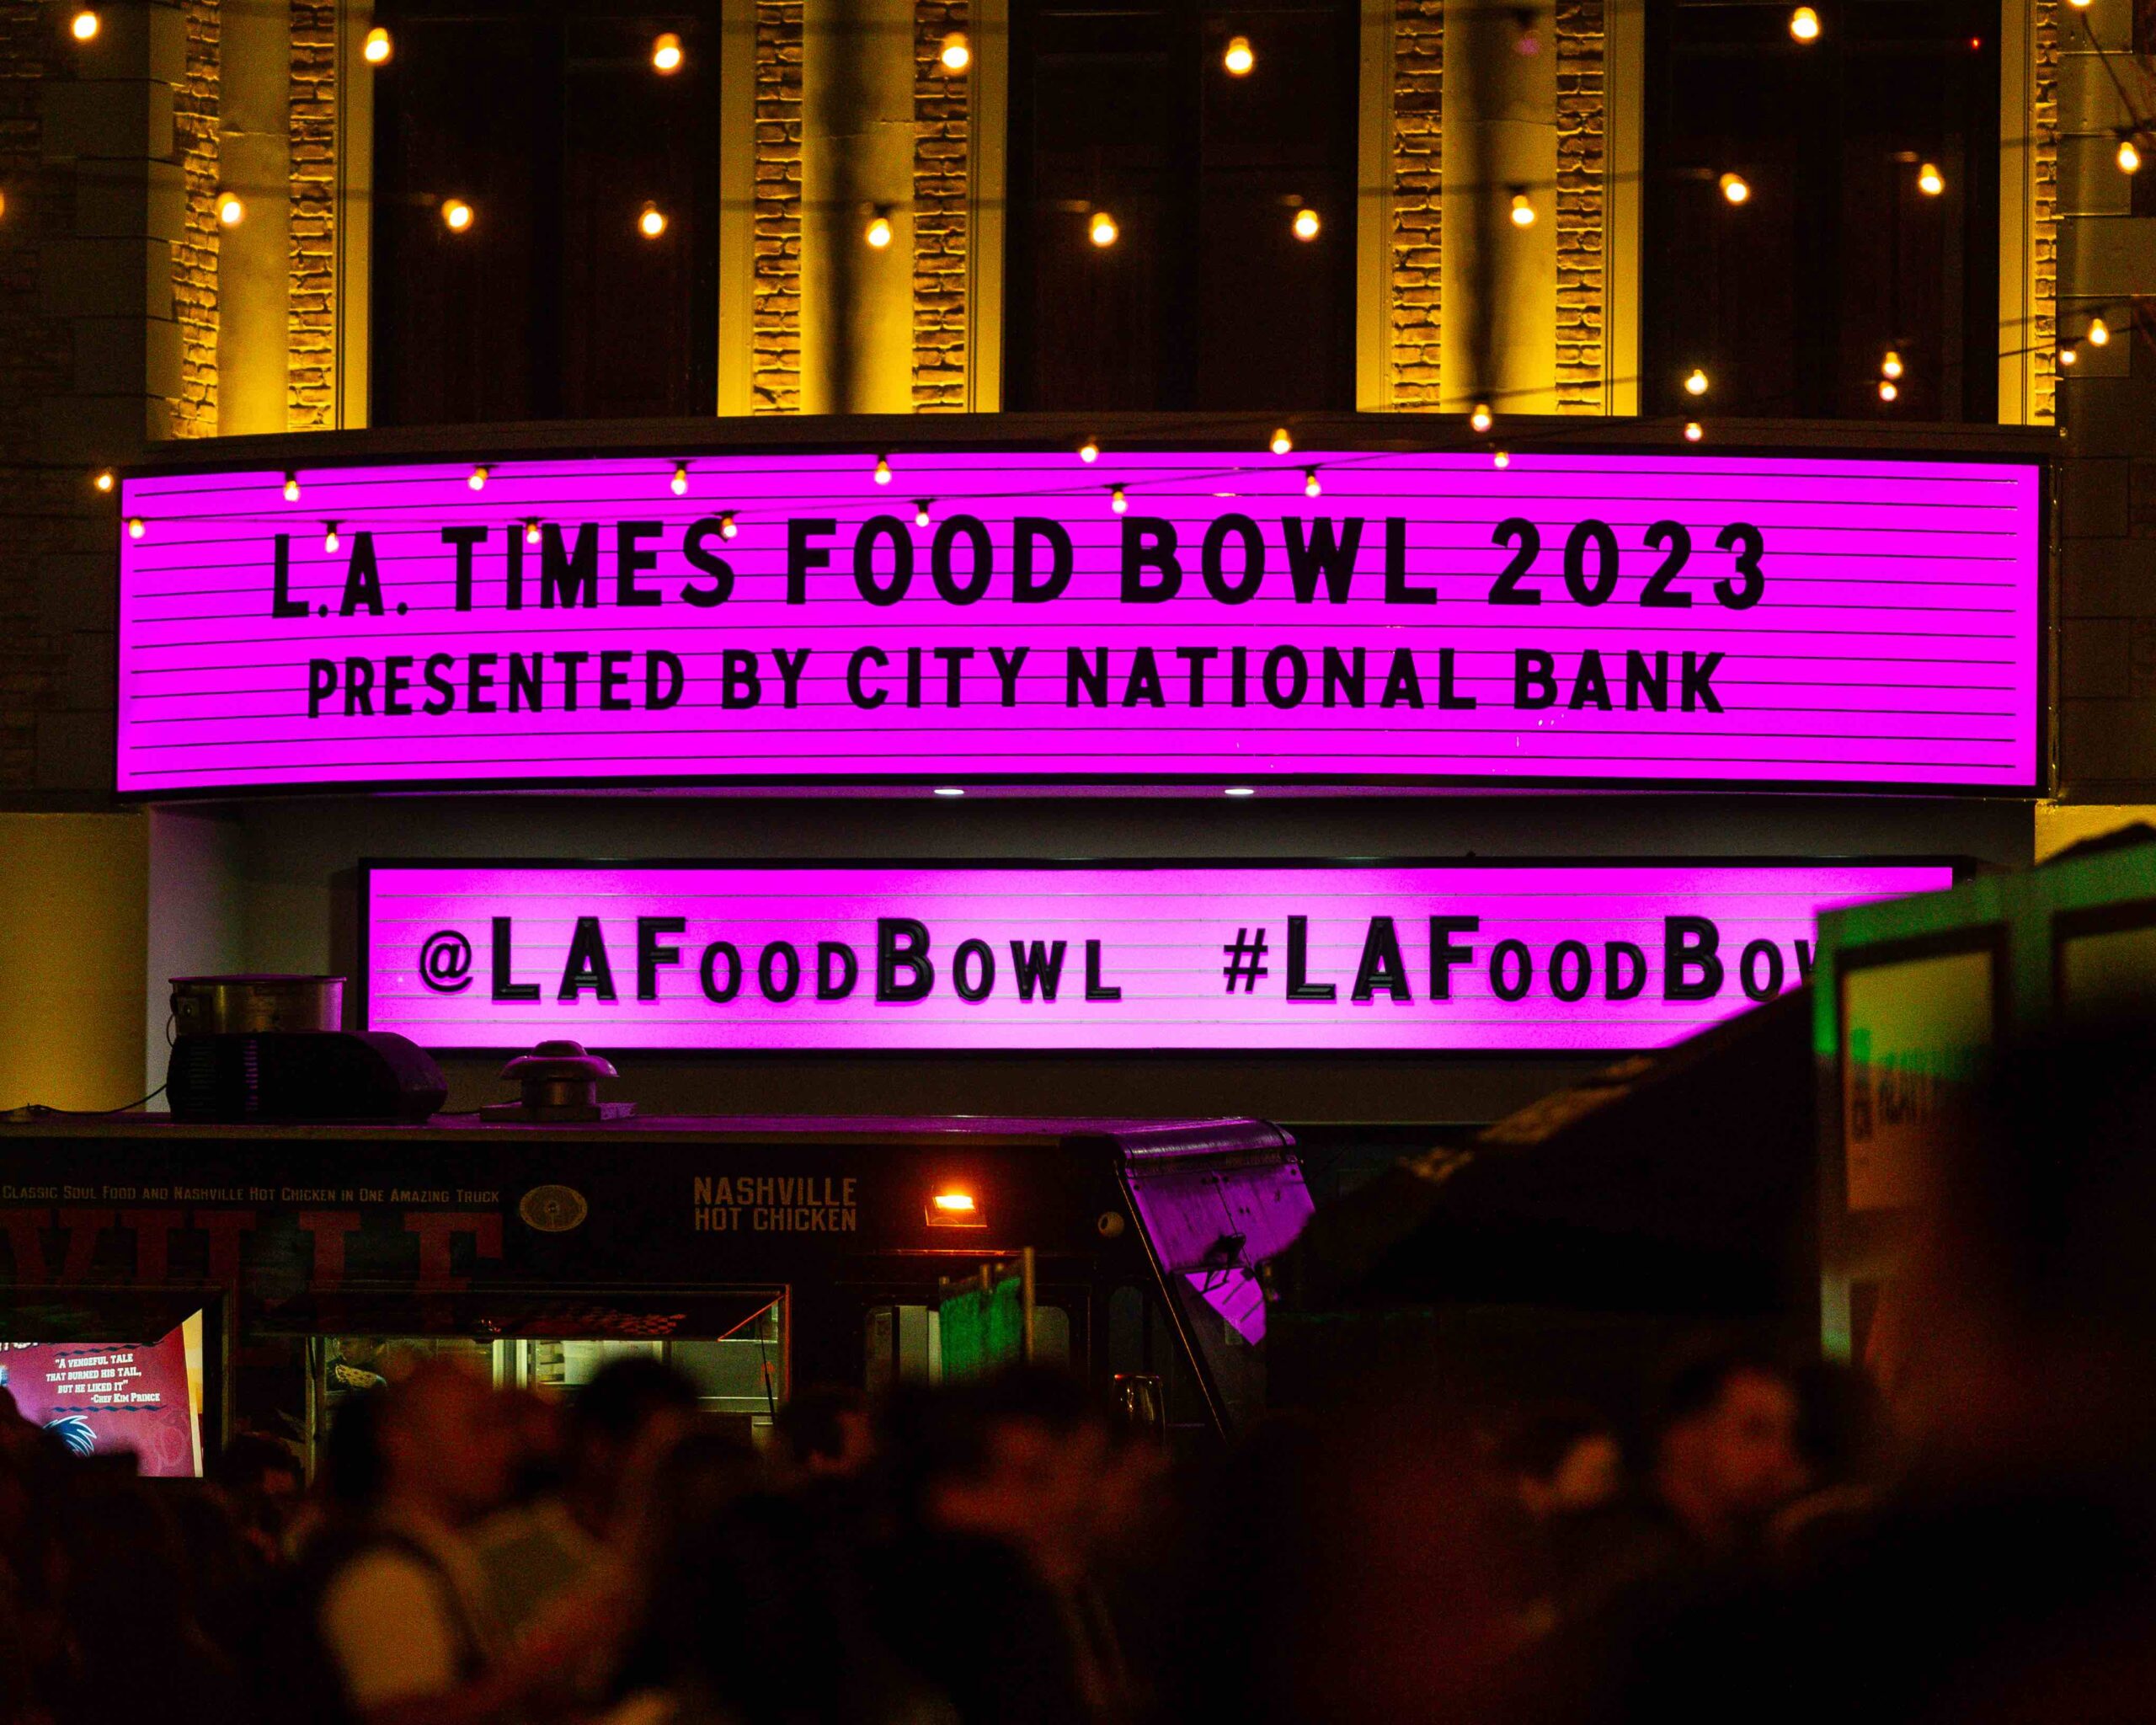 An image of the sign dsplaying the LA Times Food Bowl. 